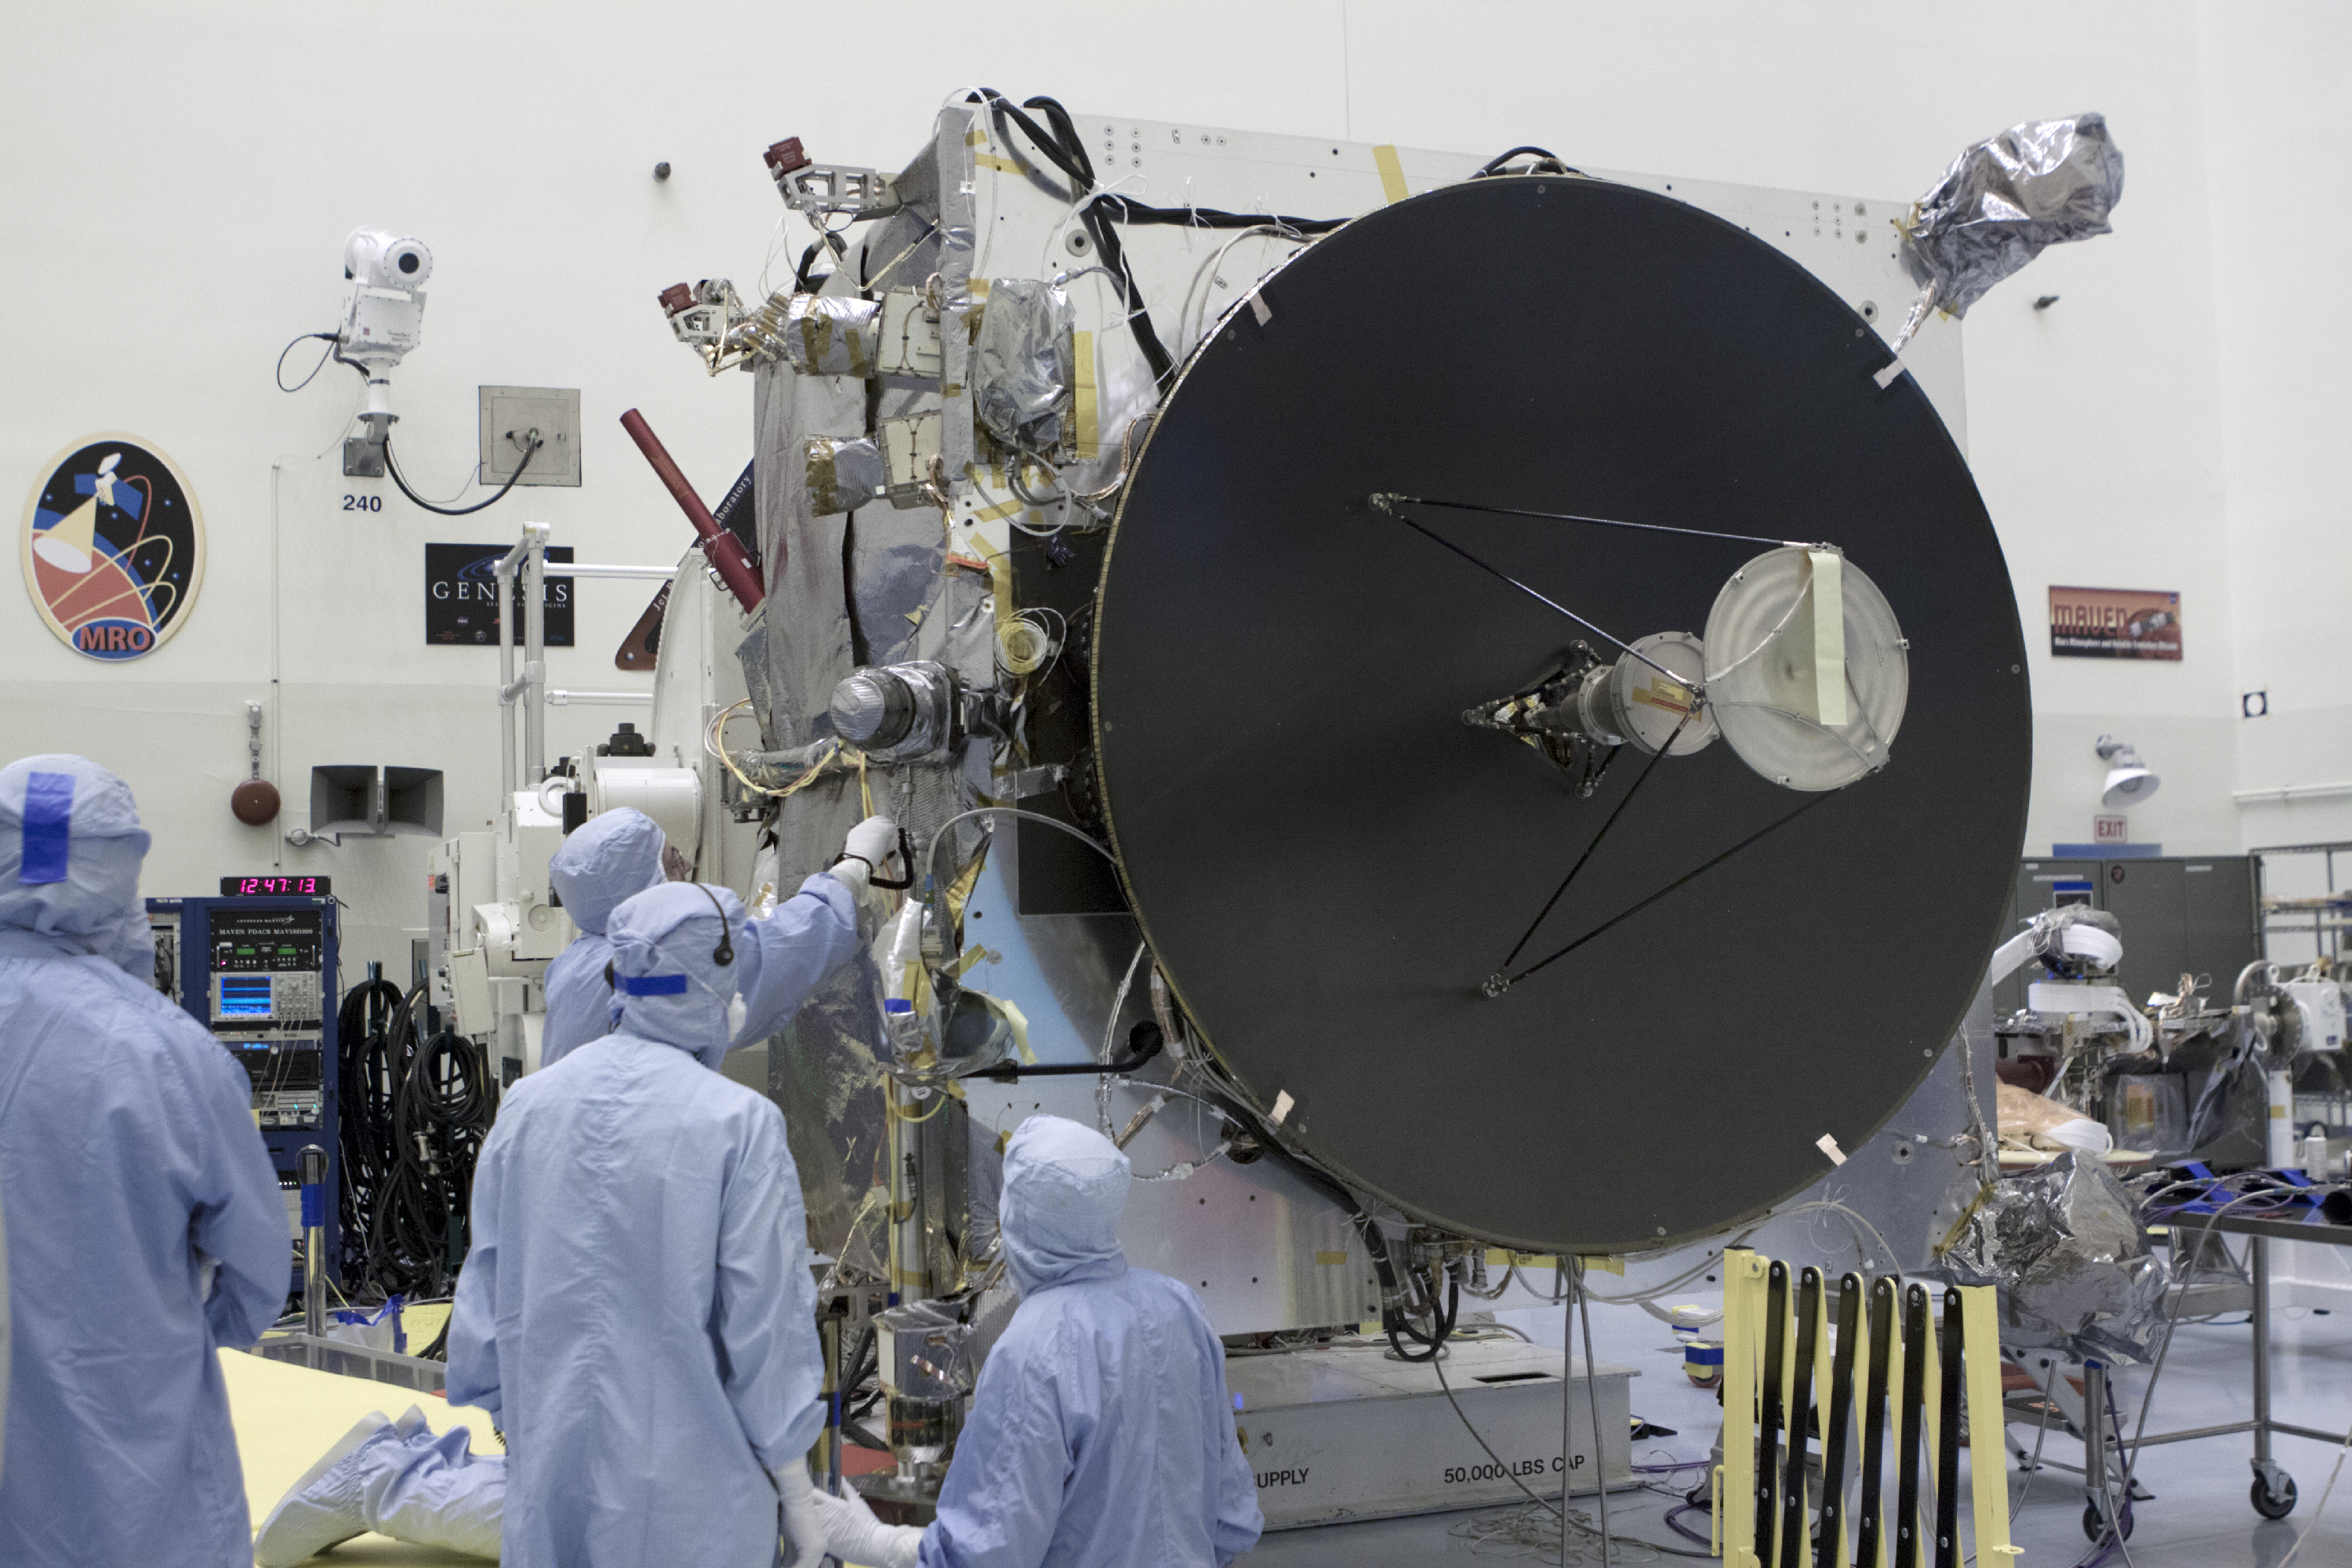 Technicians in cleanroom suits work on a spacecraft with a large dish-shaped antenna in a laboratory setting